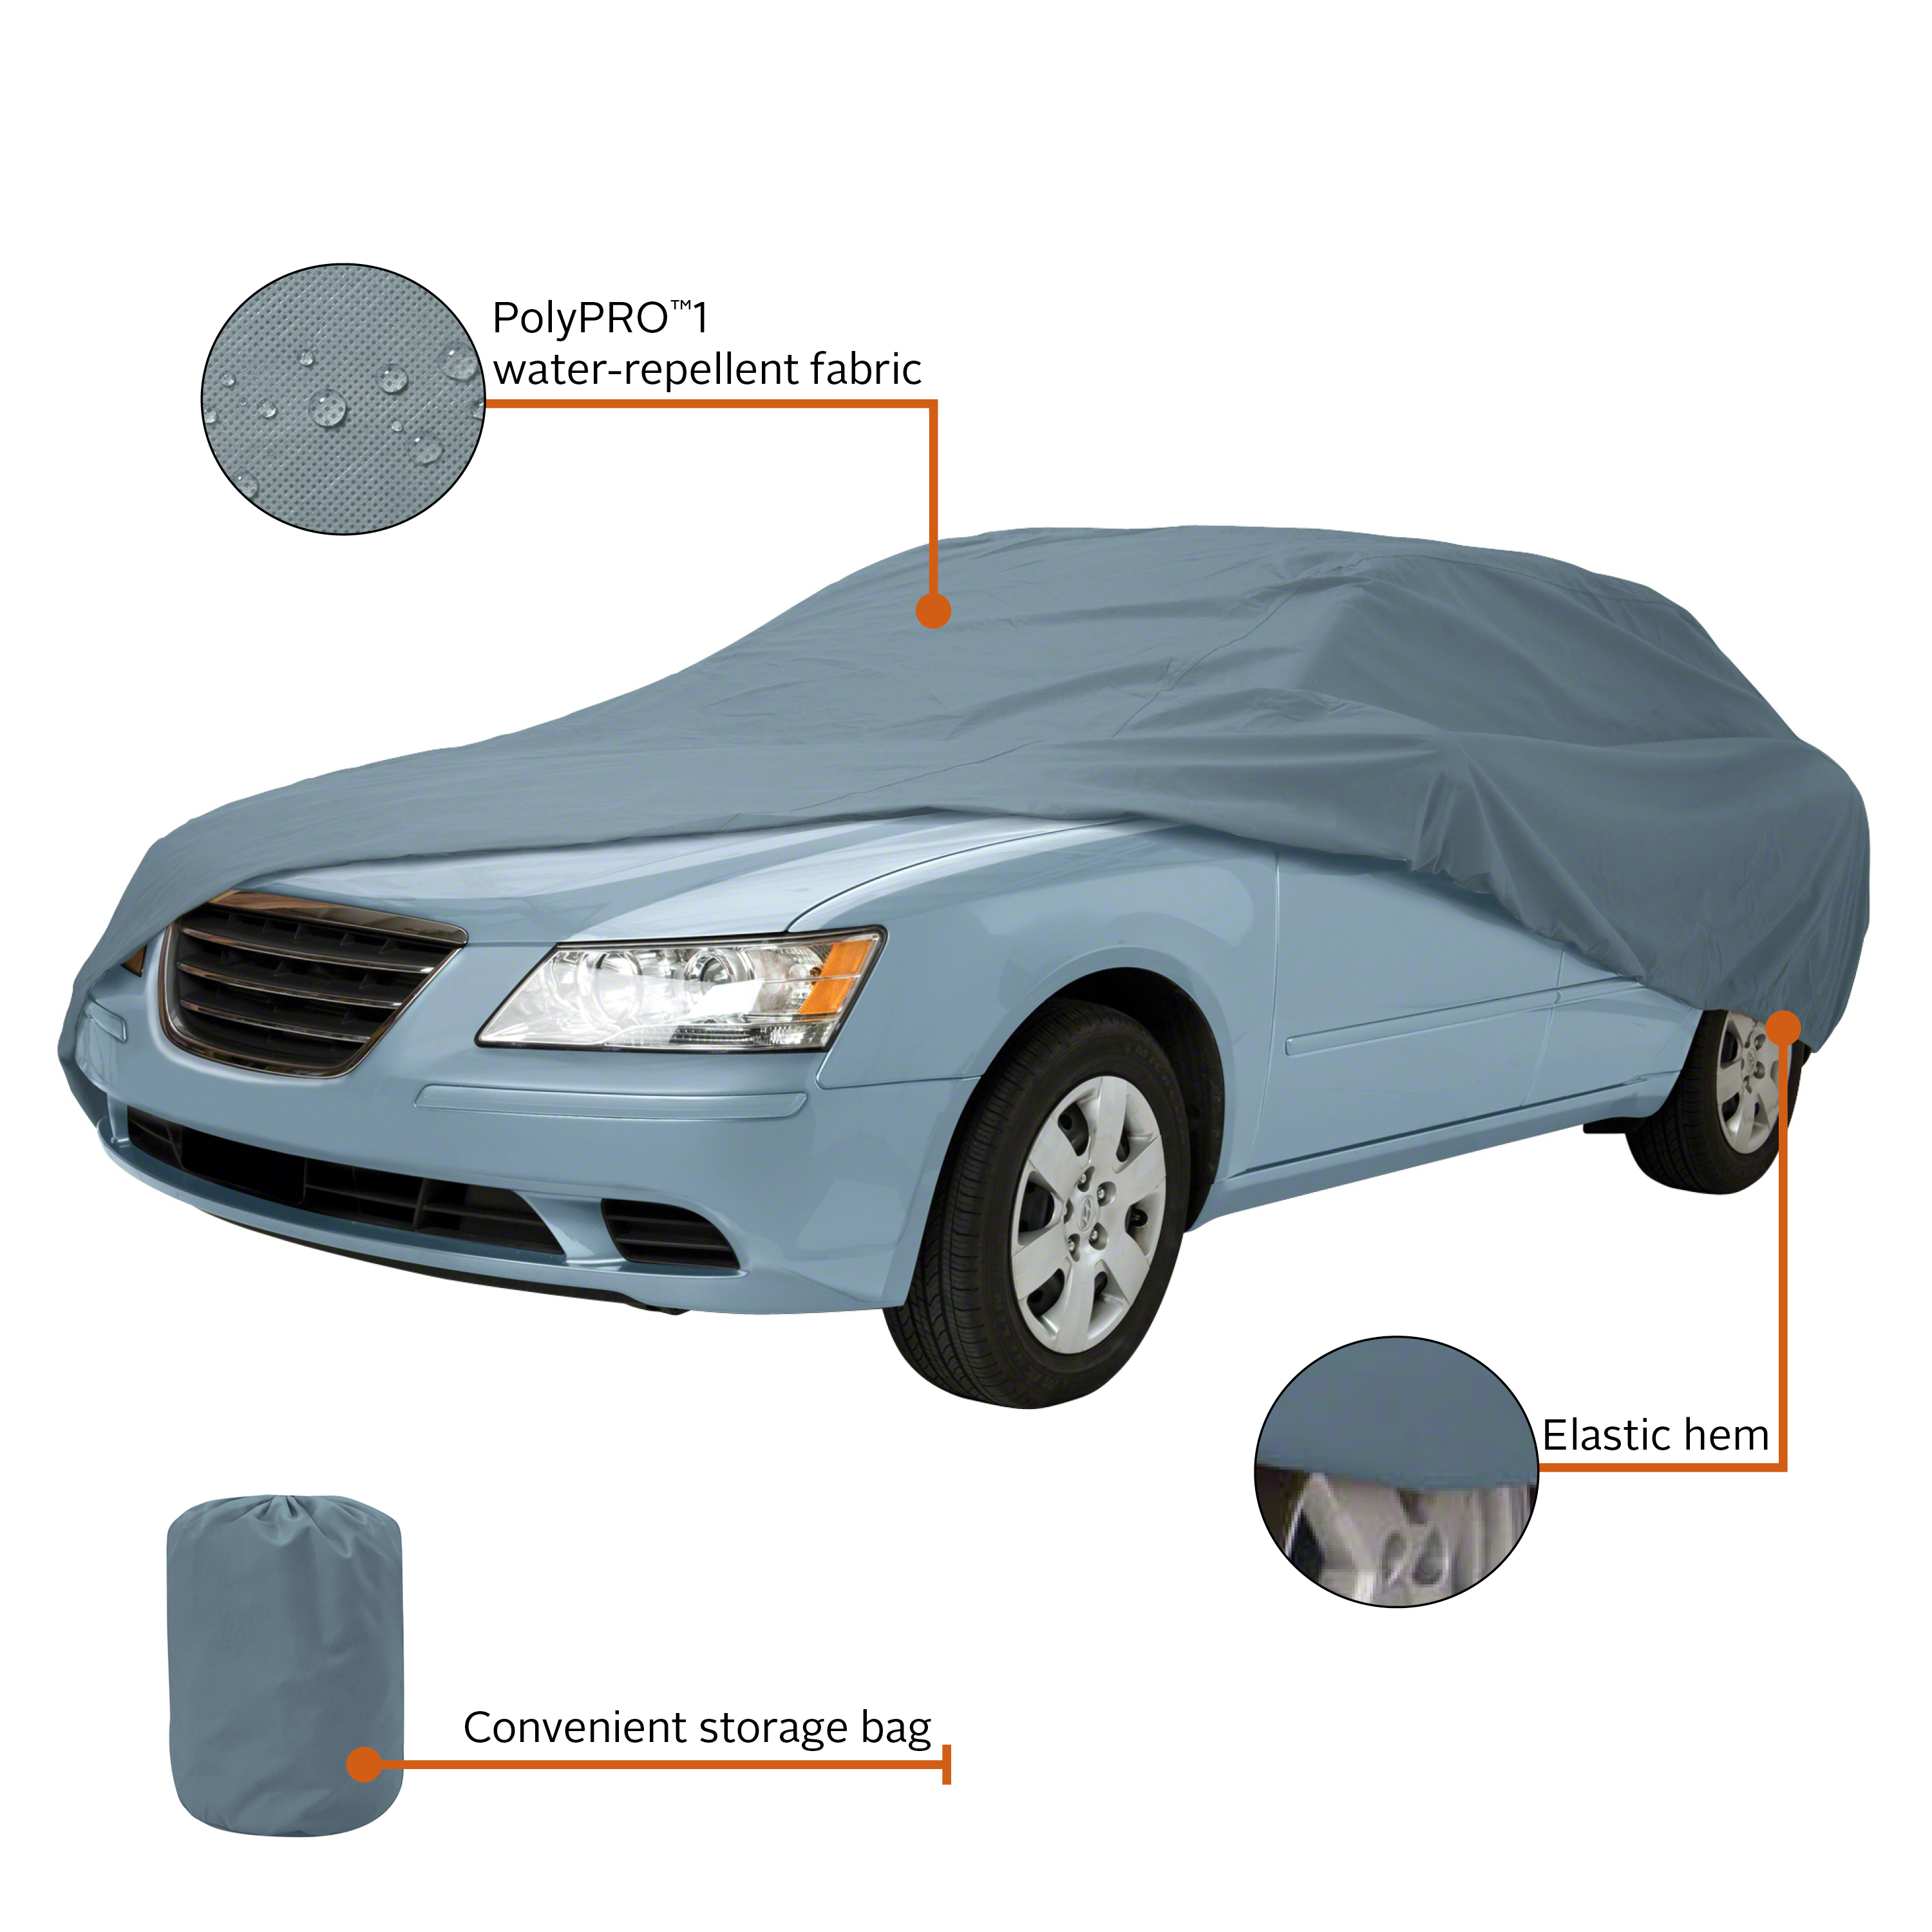 Classic Accessories OverDrive PolyPRO™ 1 Mid-Size Sedan Car Cover, 176" - 190"L, Biodiesel - image 5 of 8